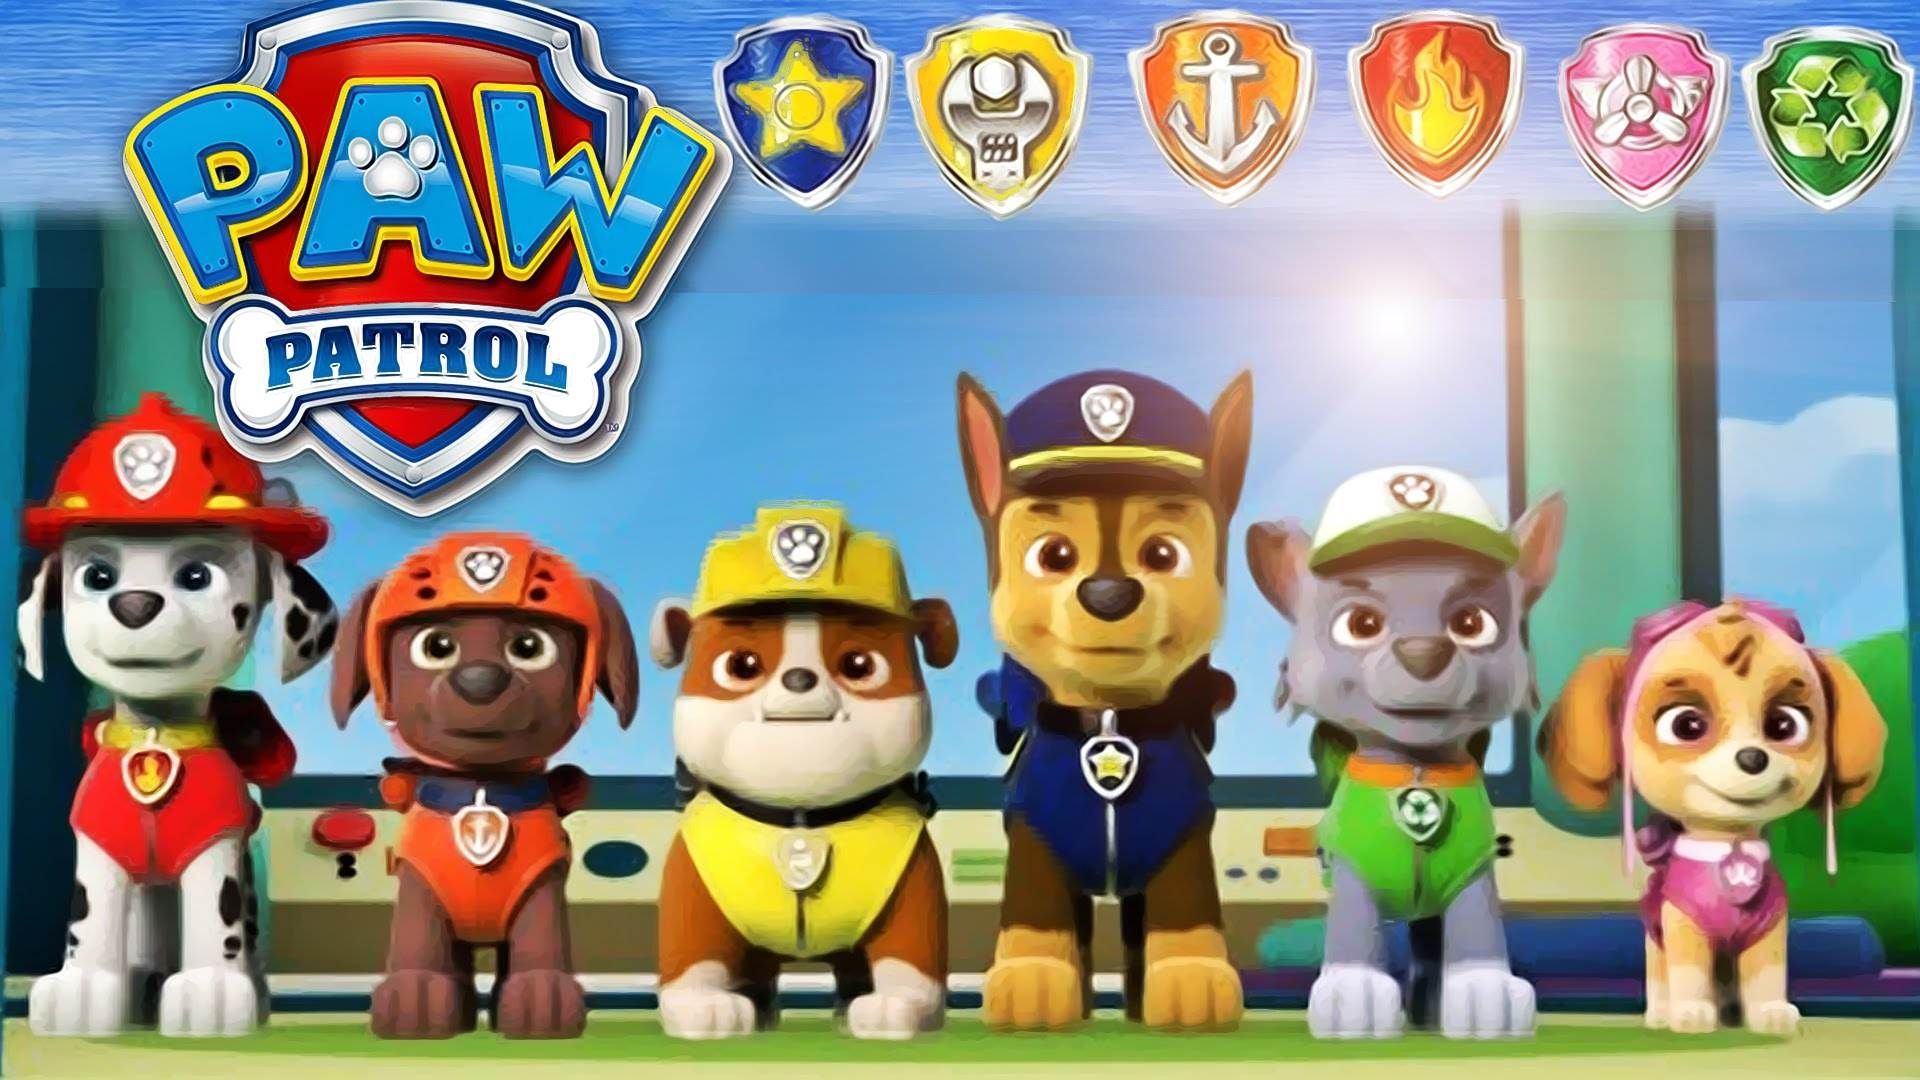 Paw Patrol HD Wallpapers 1000 Free Paw Patrol Wallpaper Images For All  Devices